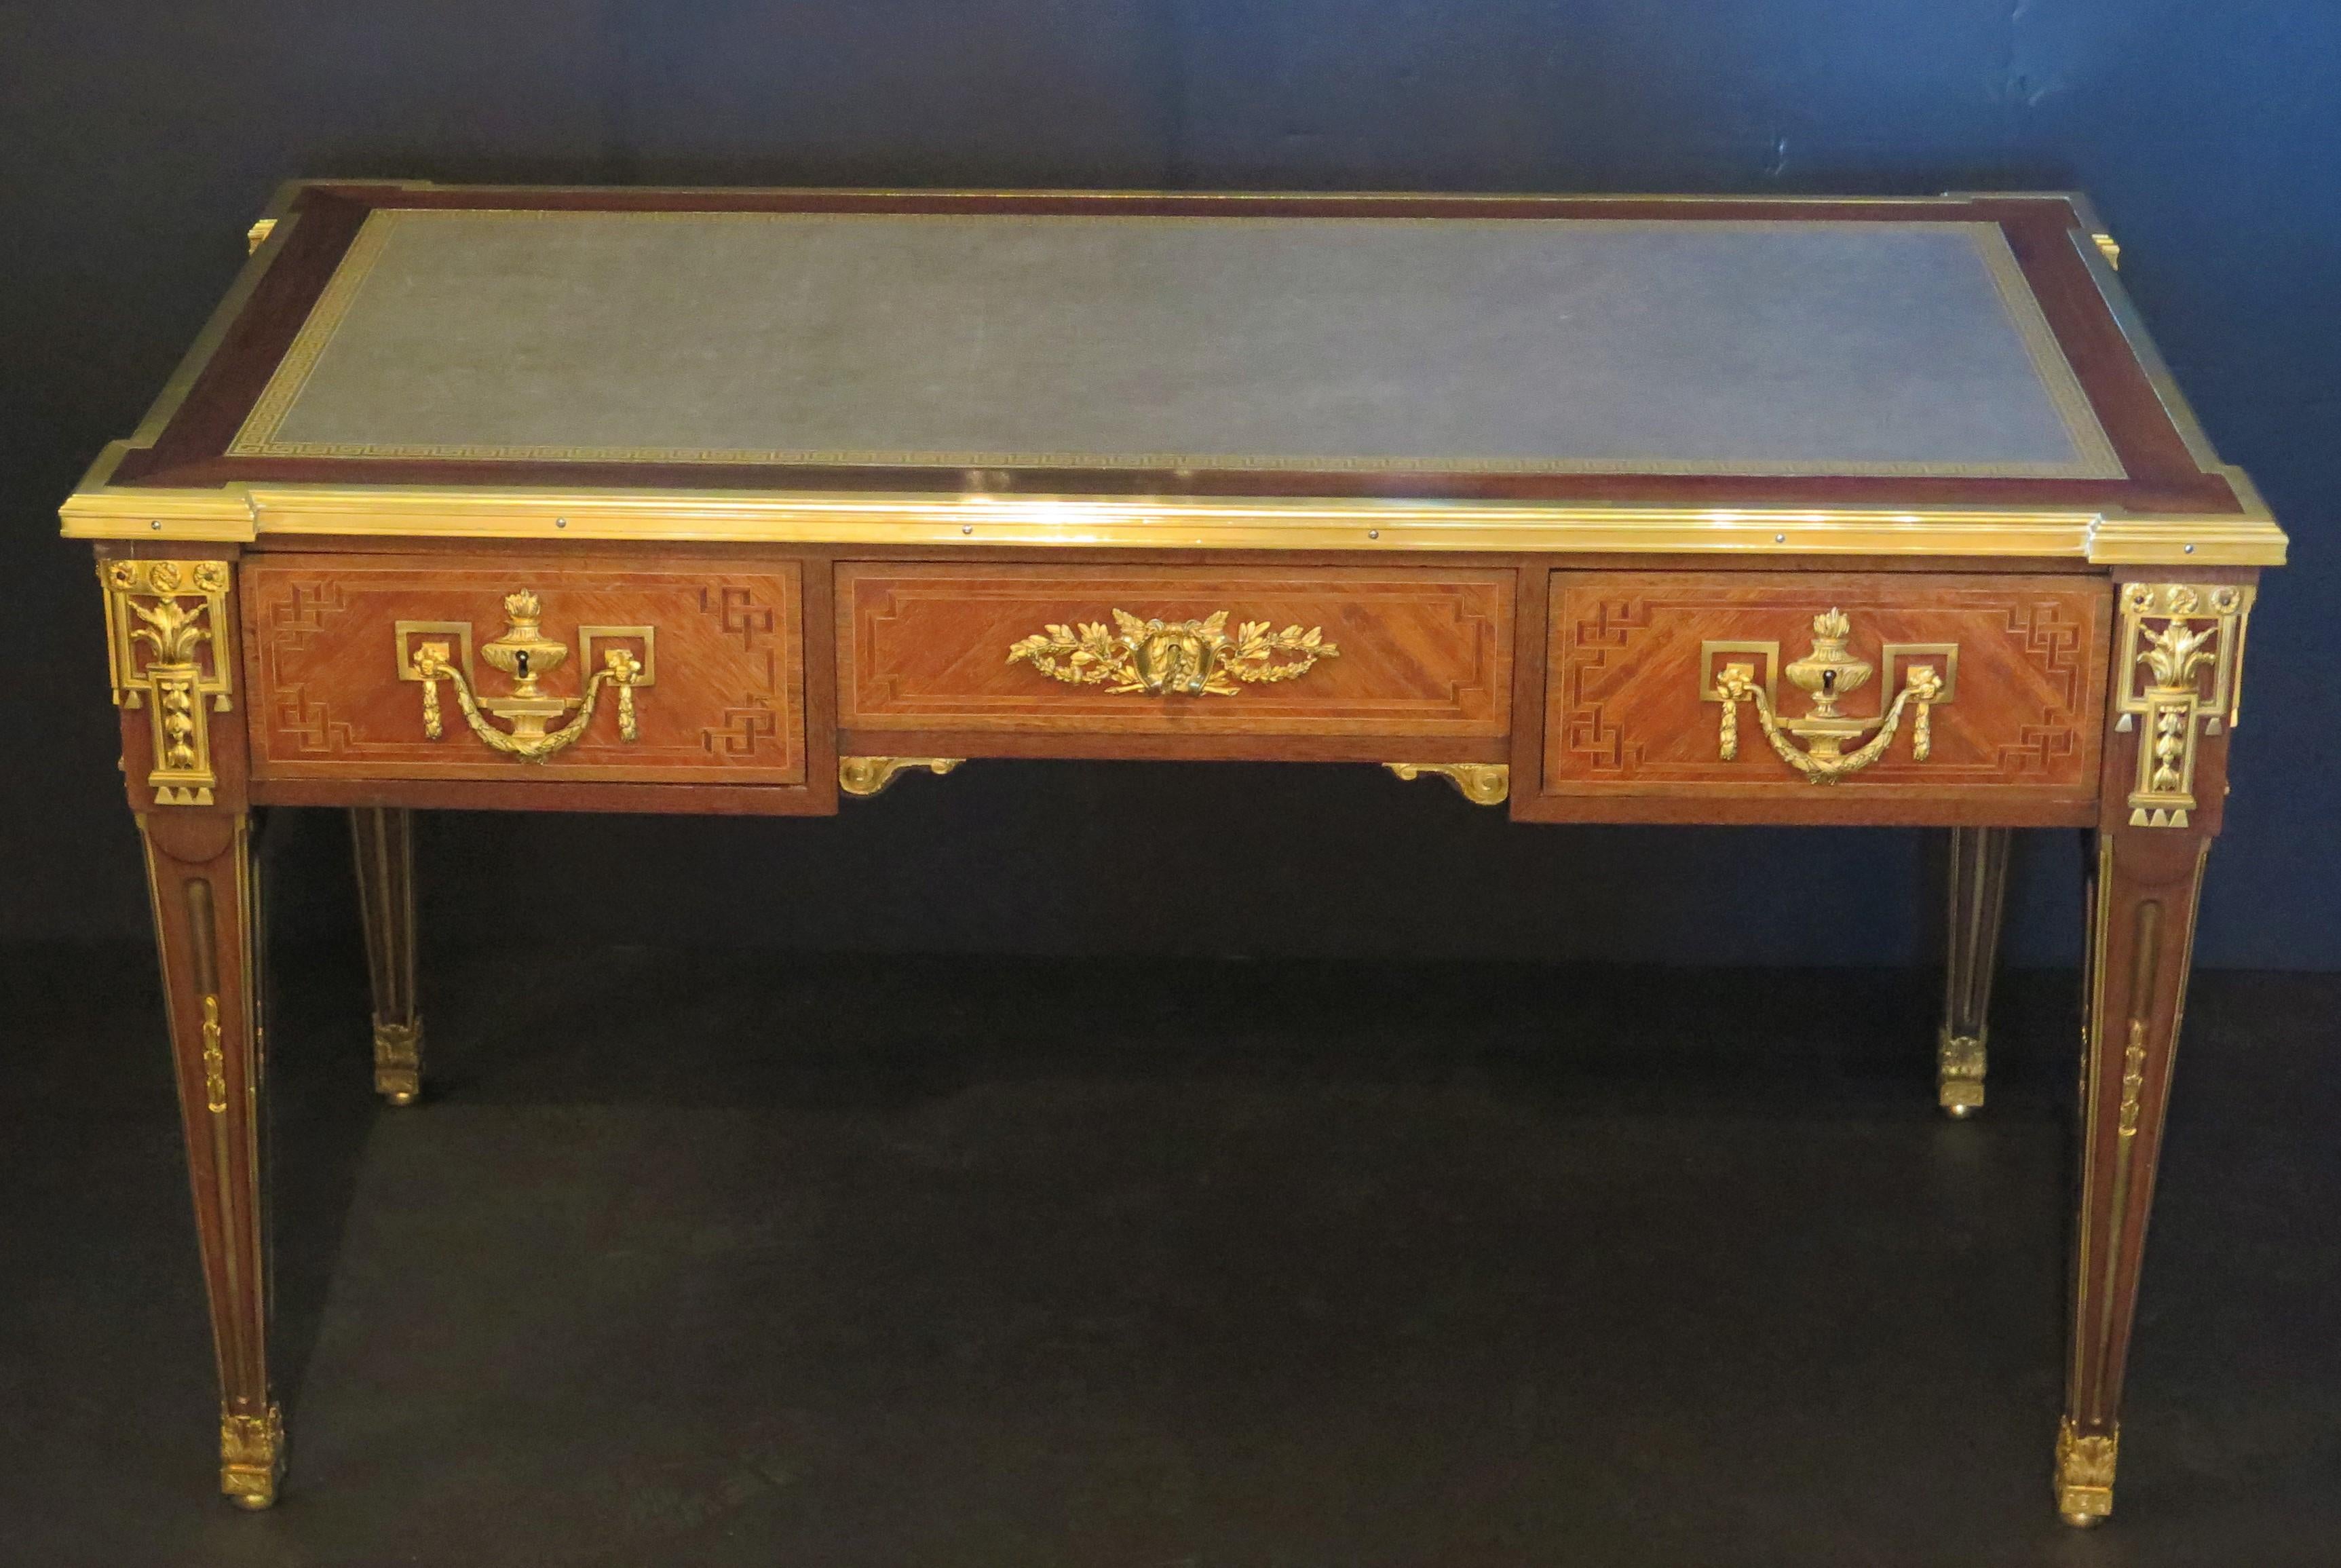 a Louis XVI-style ormolu mounted mahogany bureau plat / desk with rectangular blue-grey leather inset top (new / recently installed) and brass mounted molded edge above three drawers and raised on square tapering legs, with overall decorative ormolu